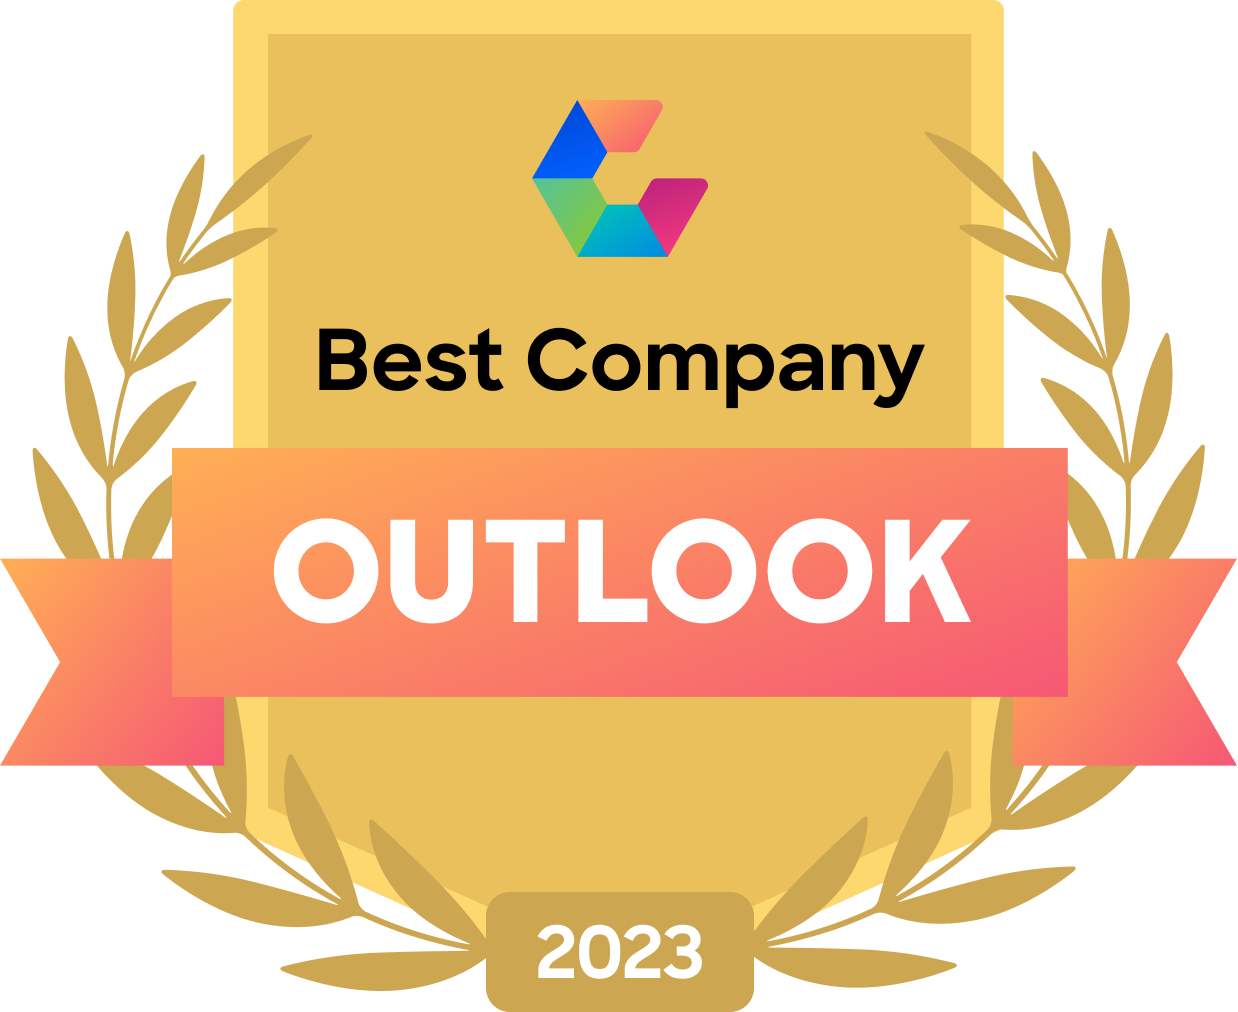 Top Rated Outlook 2023